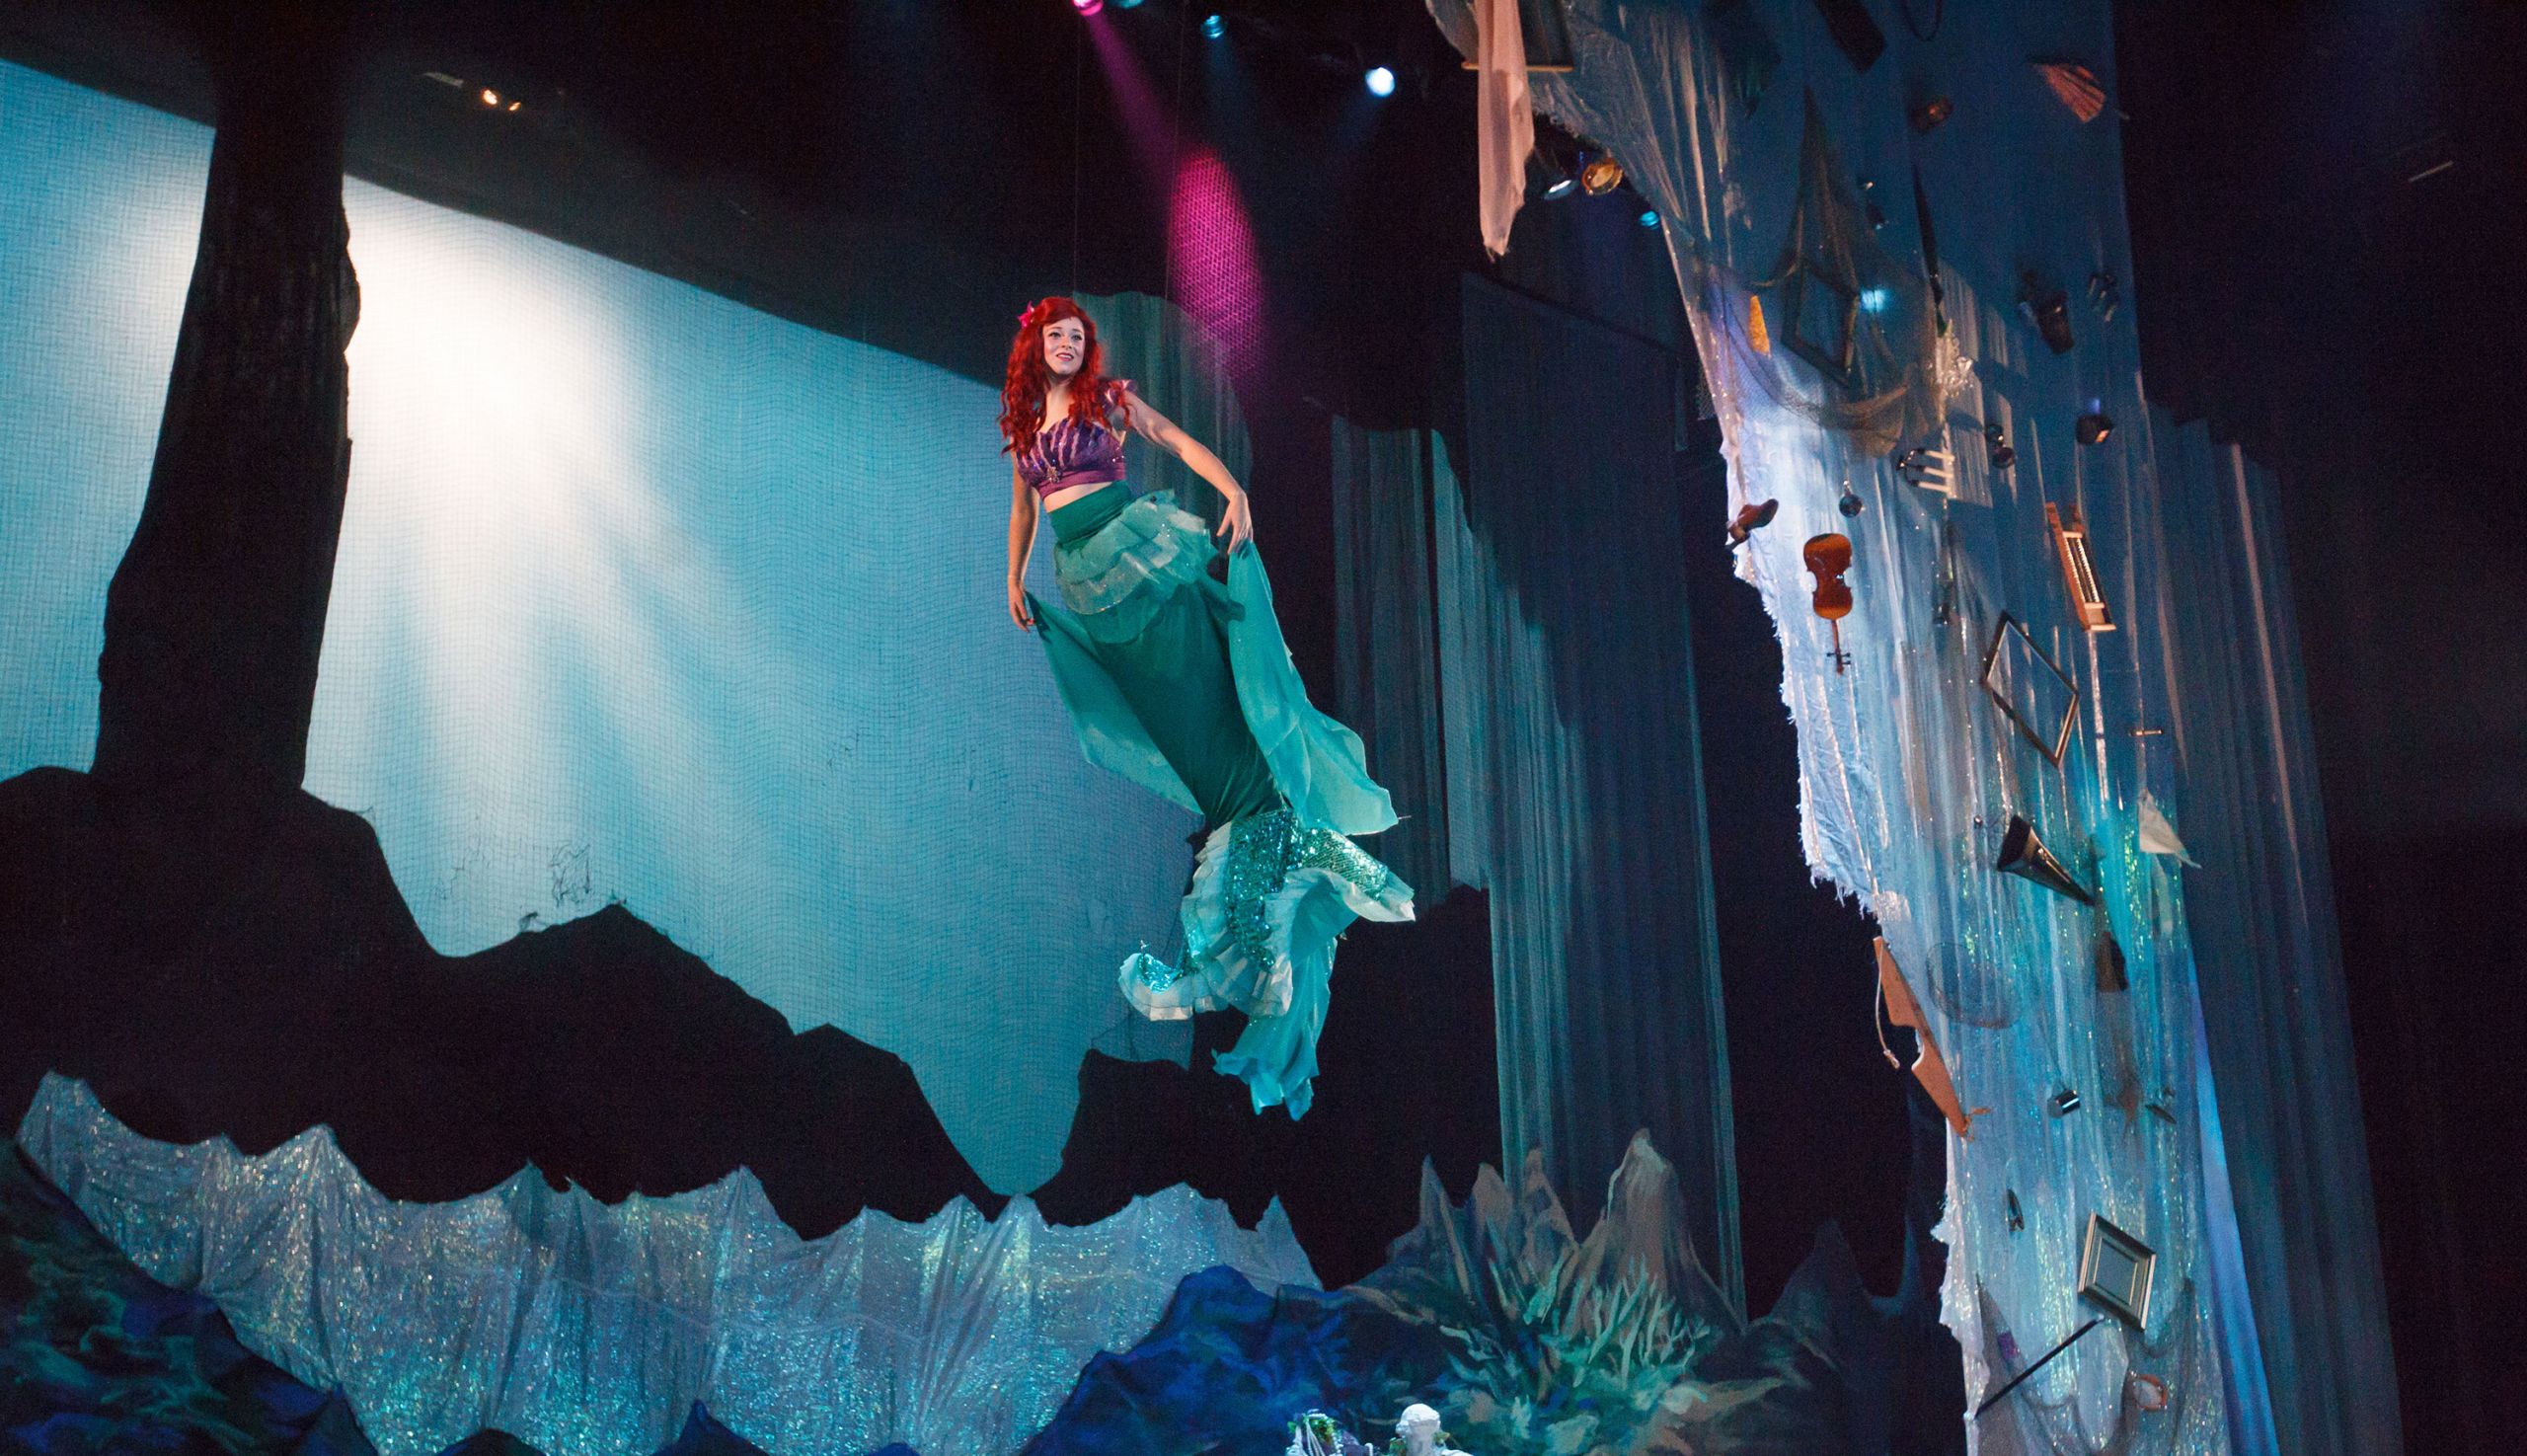 This fall, Alluvion Stage Company (Liberty University’s professional theater company) brought “The Little Mermaid” to the stage for the first time in Virginia.